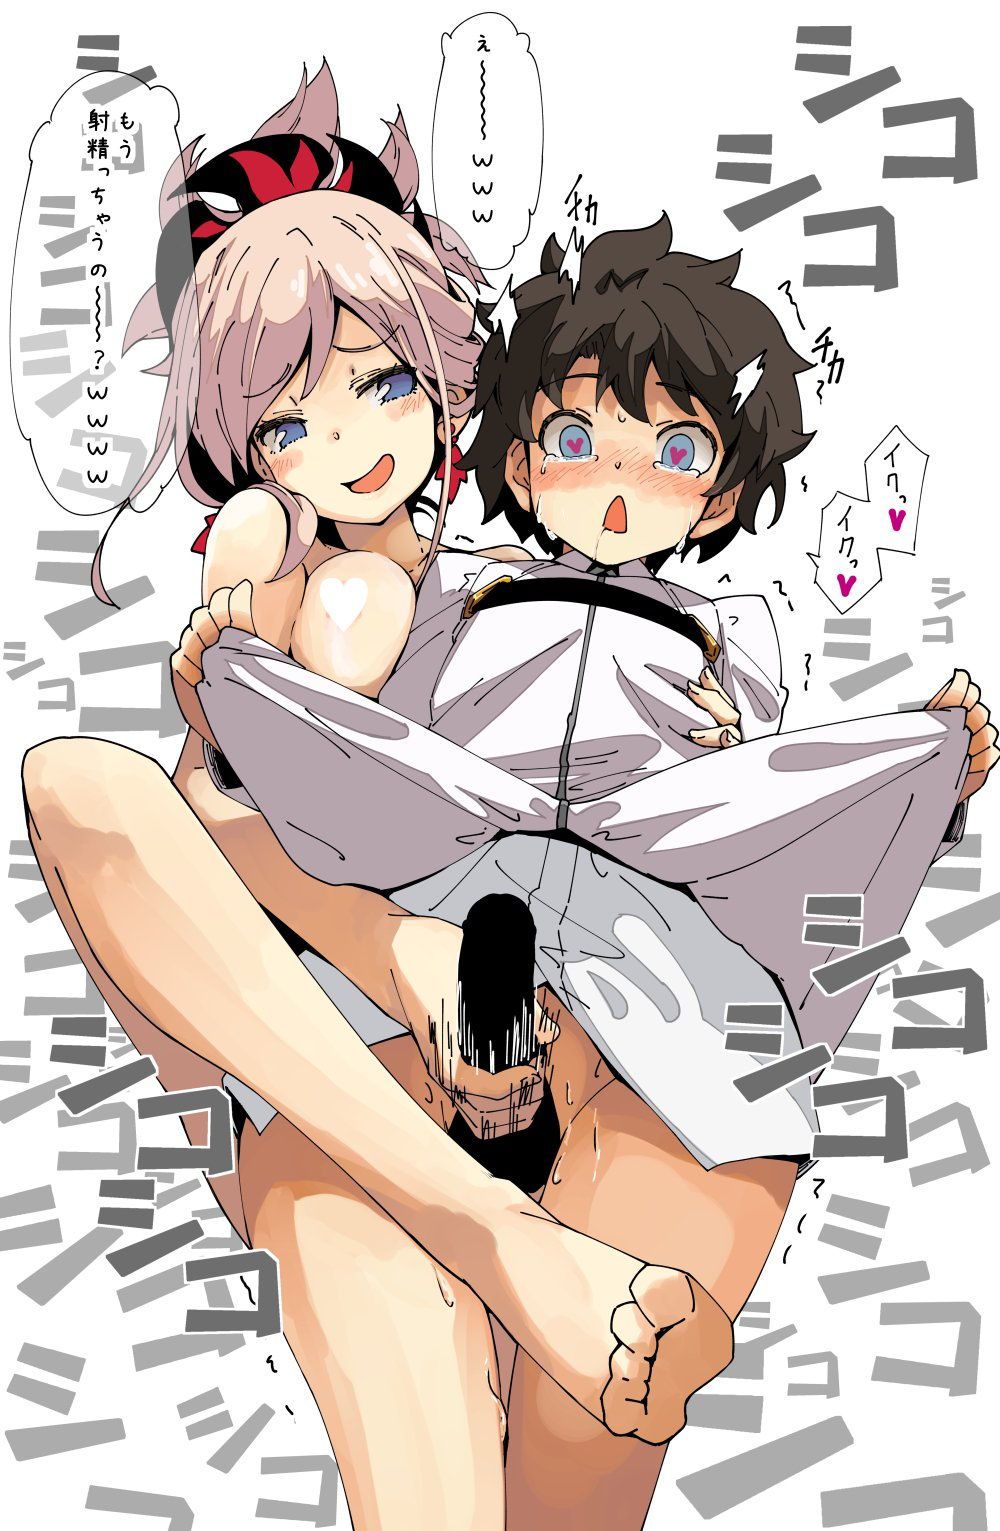 I envy the two-dimensional erotic image of the criminal confirmed sister who is having sex with Shota ... 8